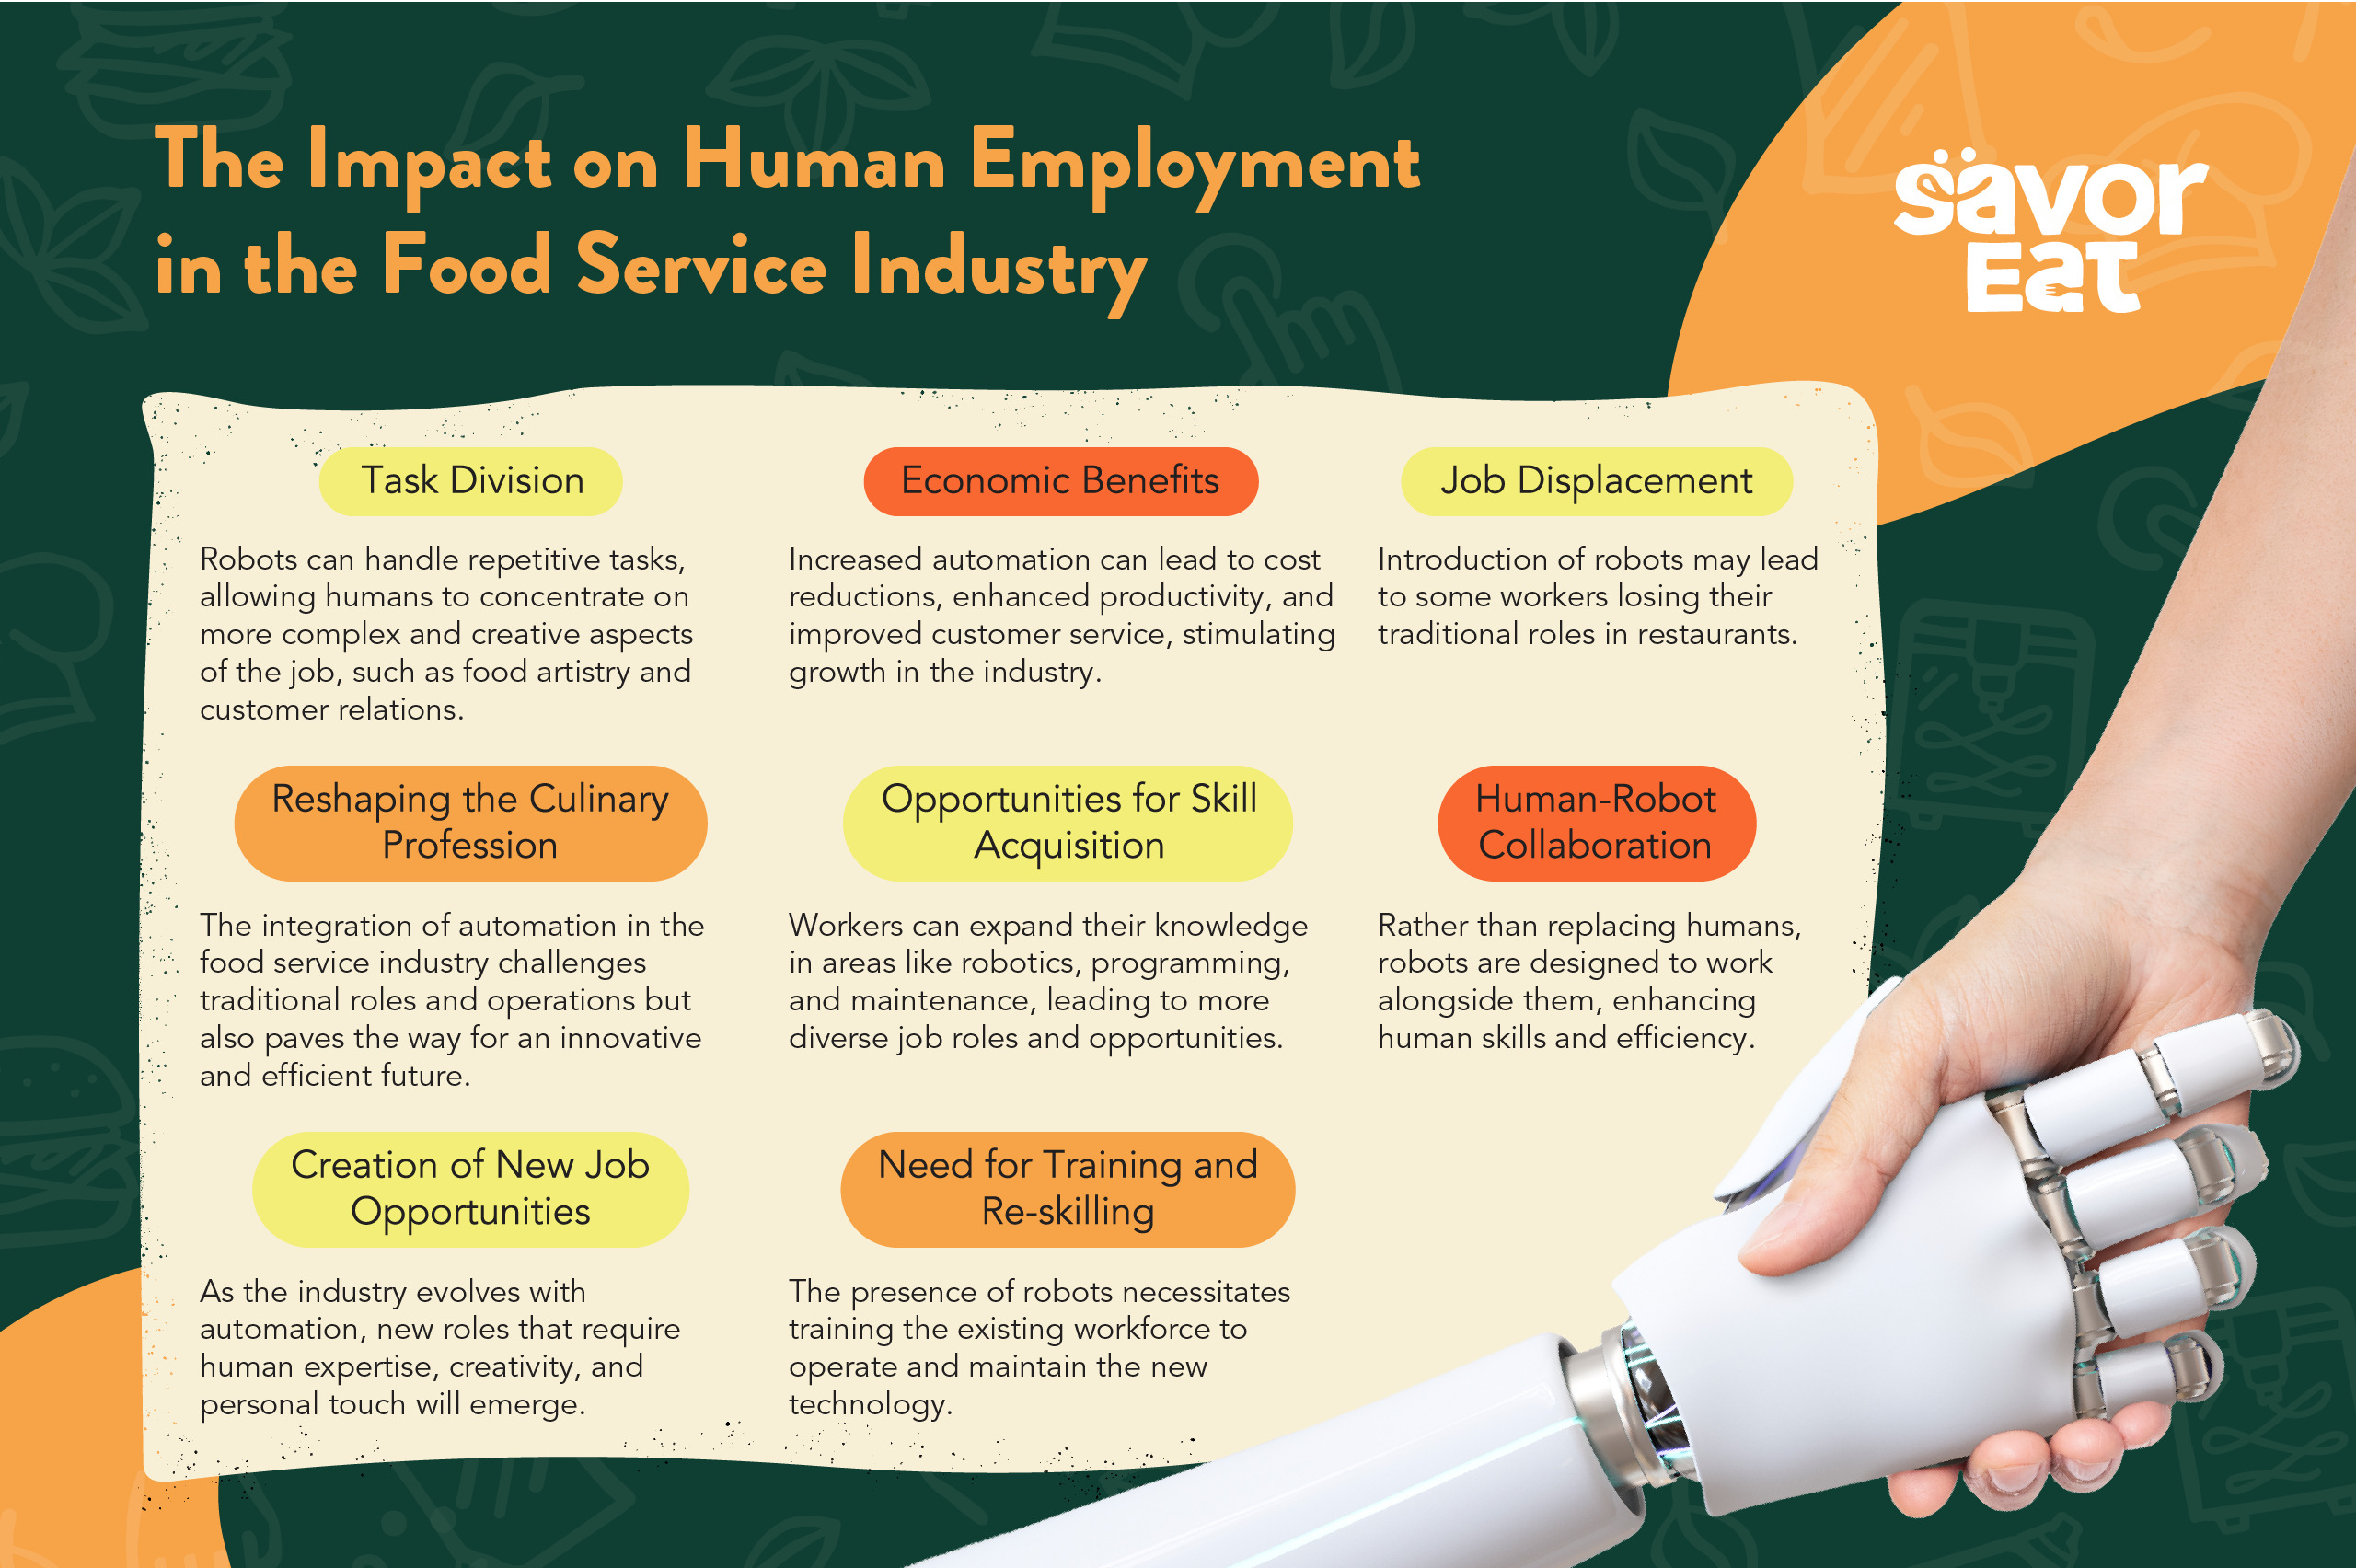 The_Impact_on_Human_Employment_in_the_Food_Service_Industry